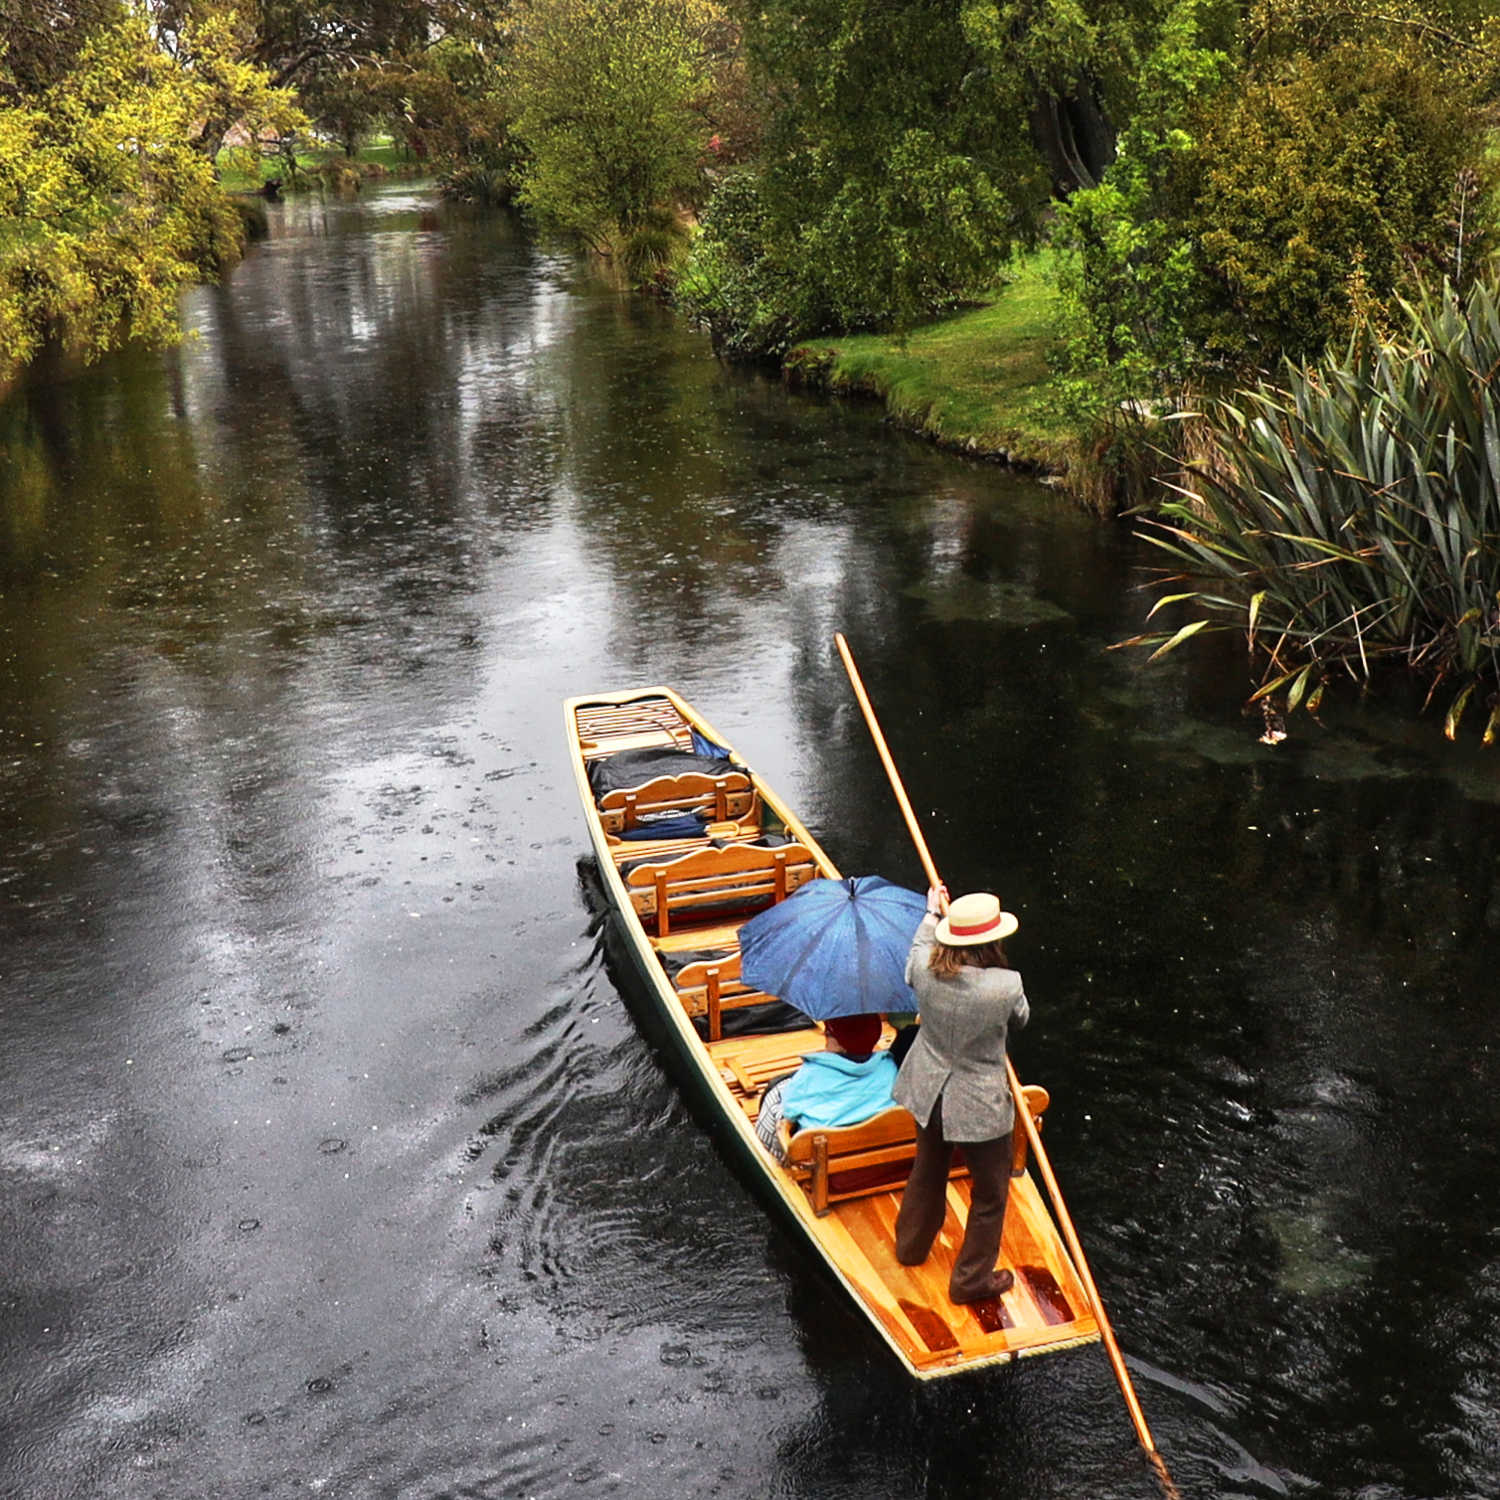 Punting in the rain, River Avon, Christchurch, New Zealand